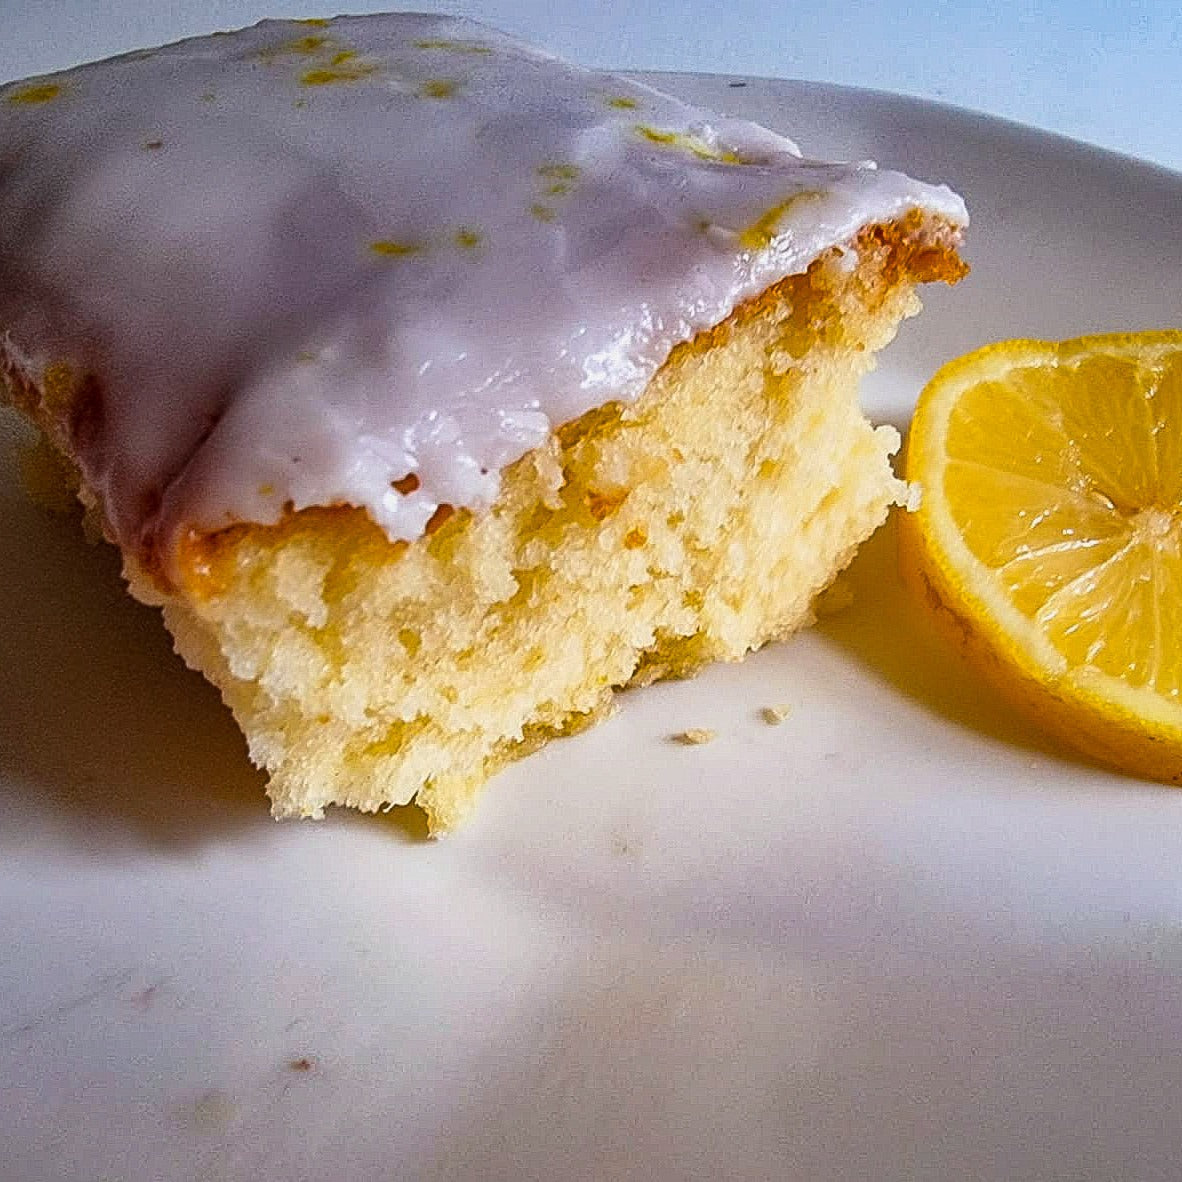 Refreshing lemon cake tray with a tangy citrus flavour